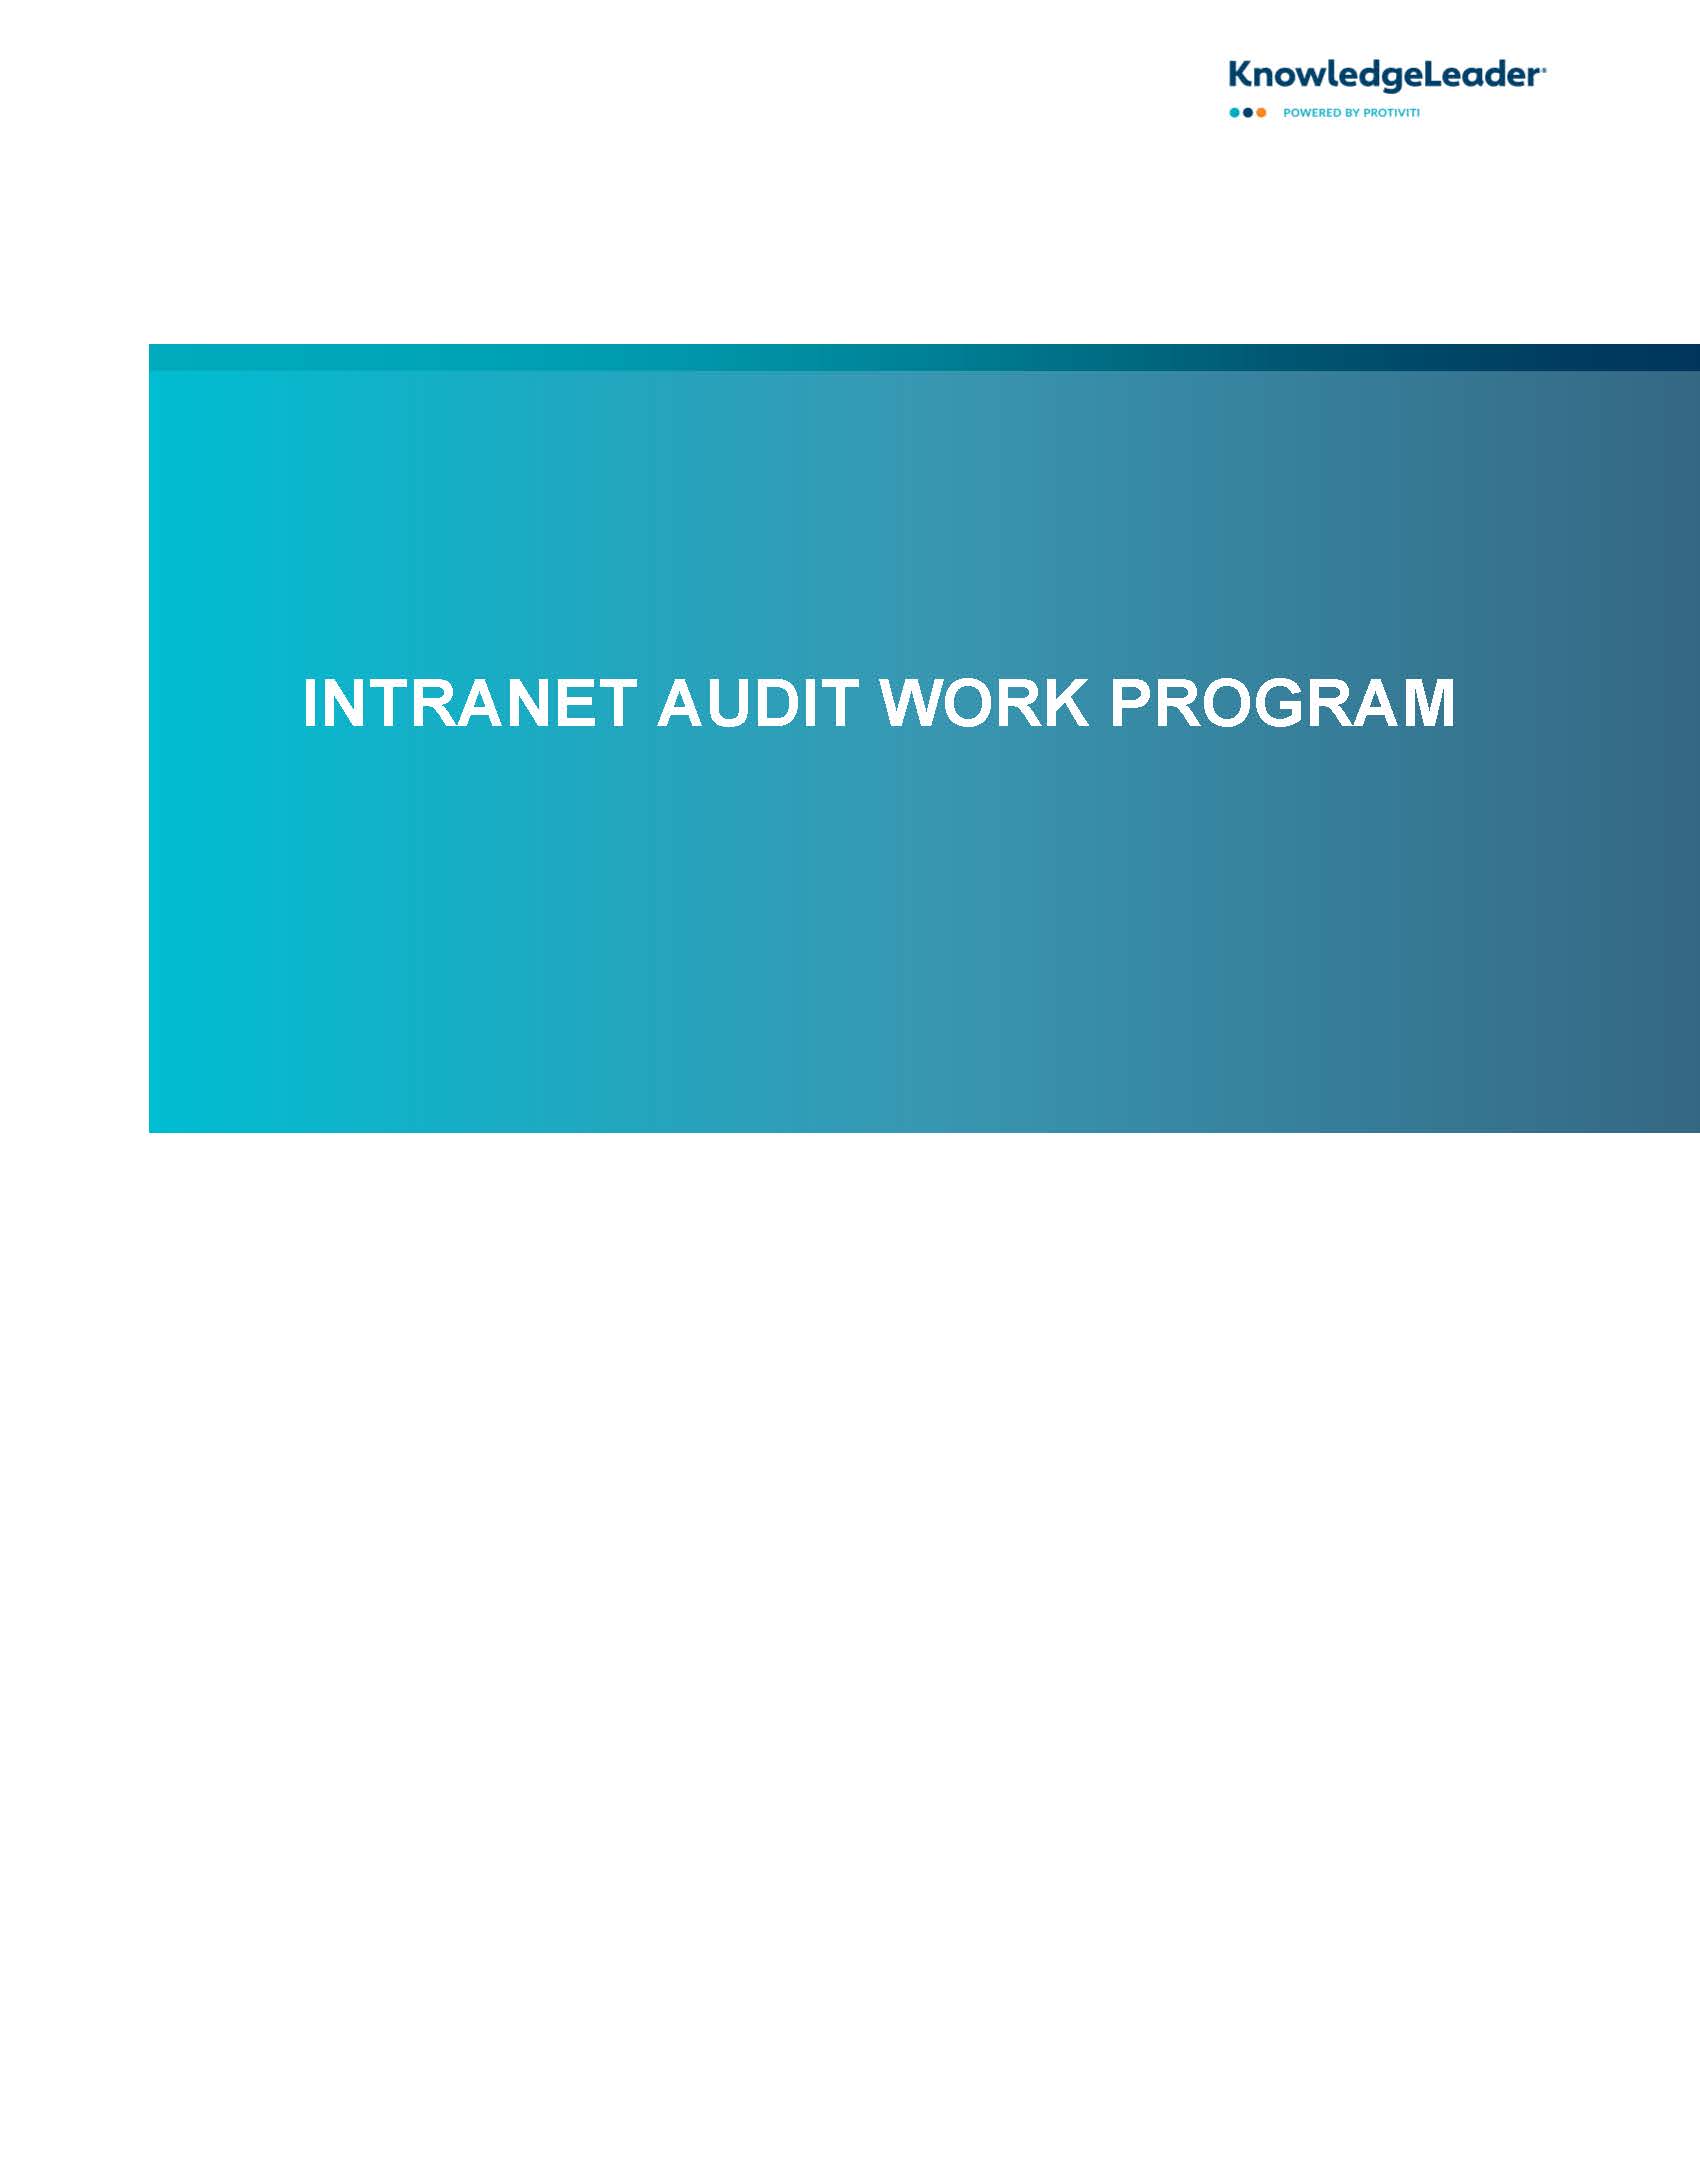 Screenshot of the first page of Intranet Audit Work Program